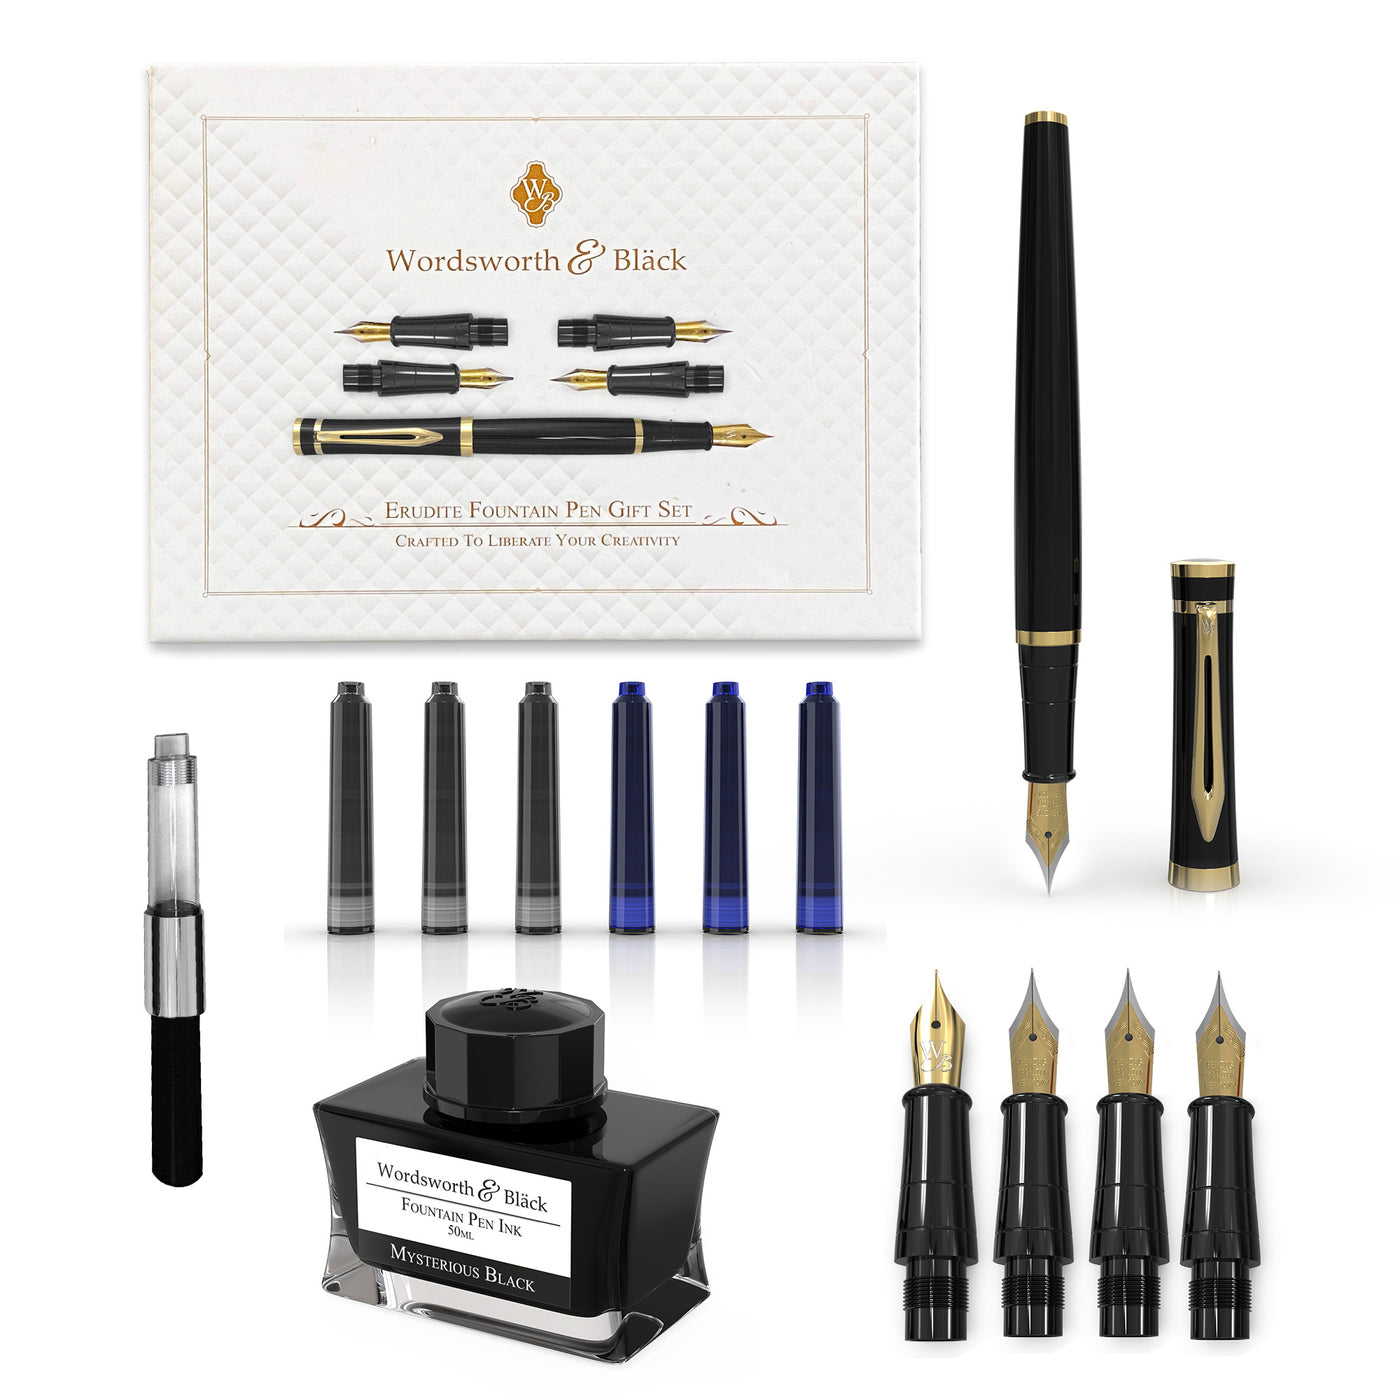 Wordsworth & Black Fountain Pen Set, Medium Nib, Includes 24 Ink Cartridges and Ink Refill Converter, Gift Case, Journaling, Calligraphy, Smooth